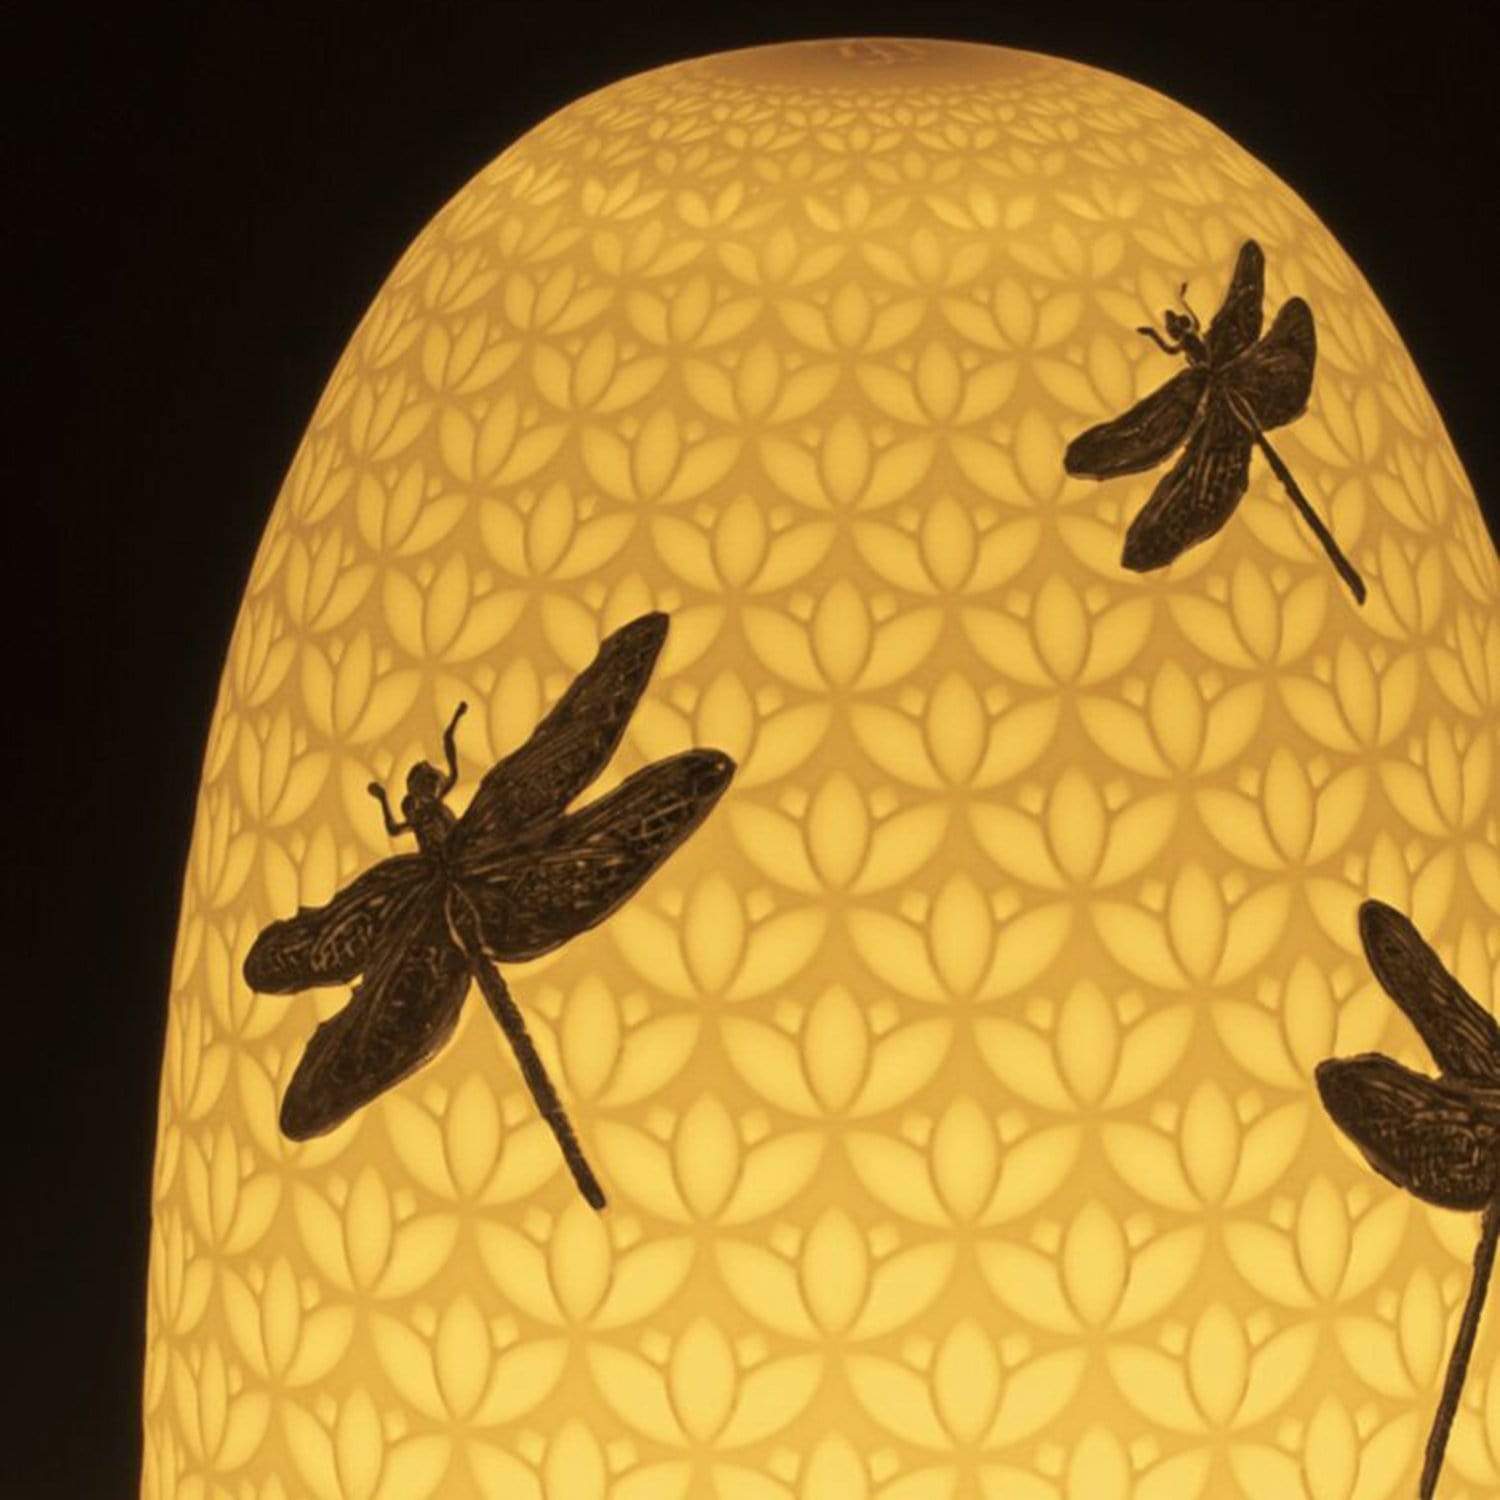 Lladro Dragonflies Dome Table Lamp - 1023967 - Jashanmal Home